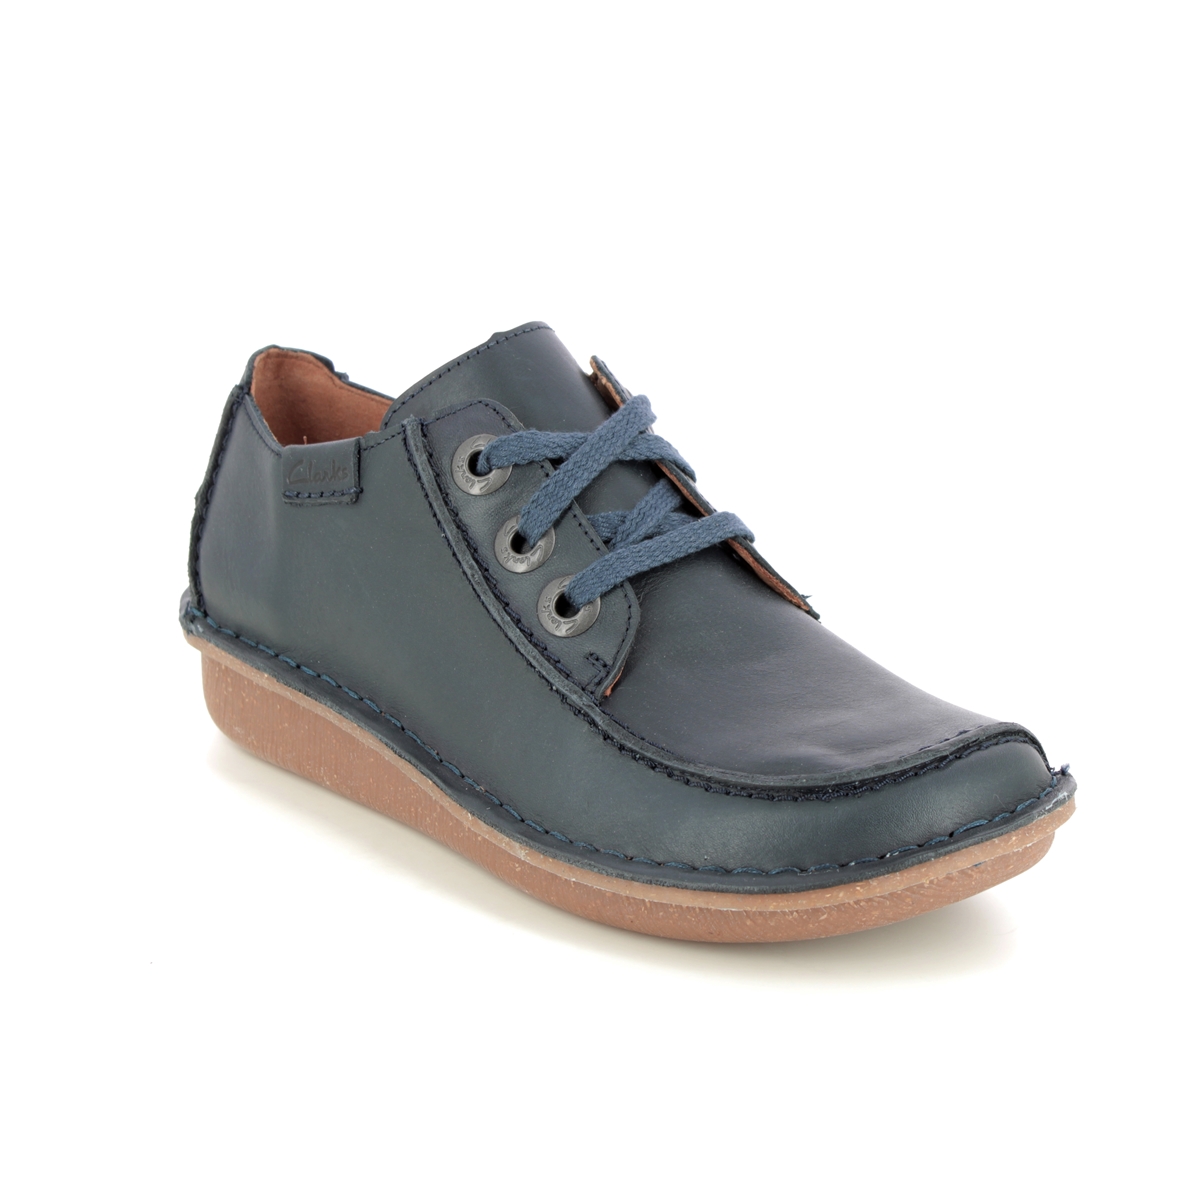 Clarks Funny Dream Navy Leather Womens Lacing Shoes 668184D In Size 7 In Plain Navy Leather